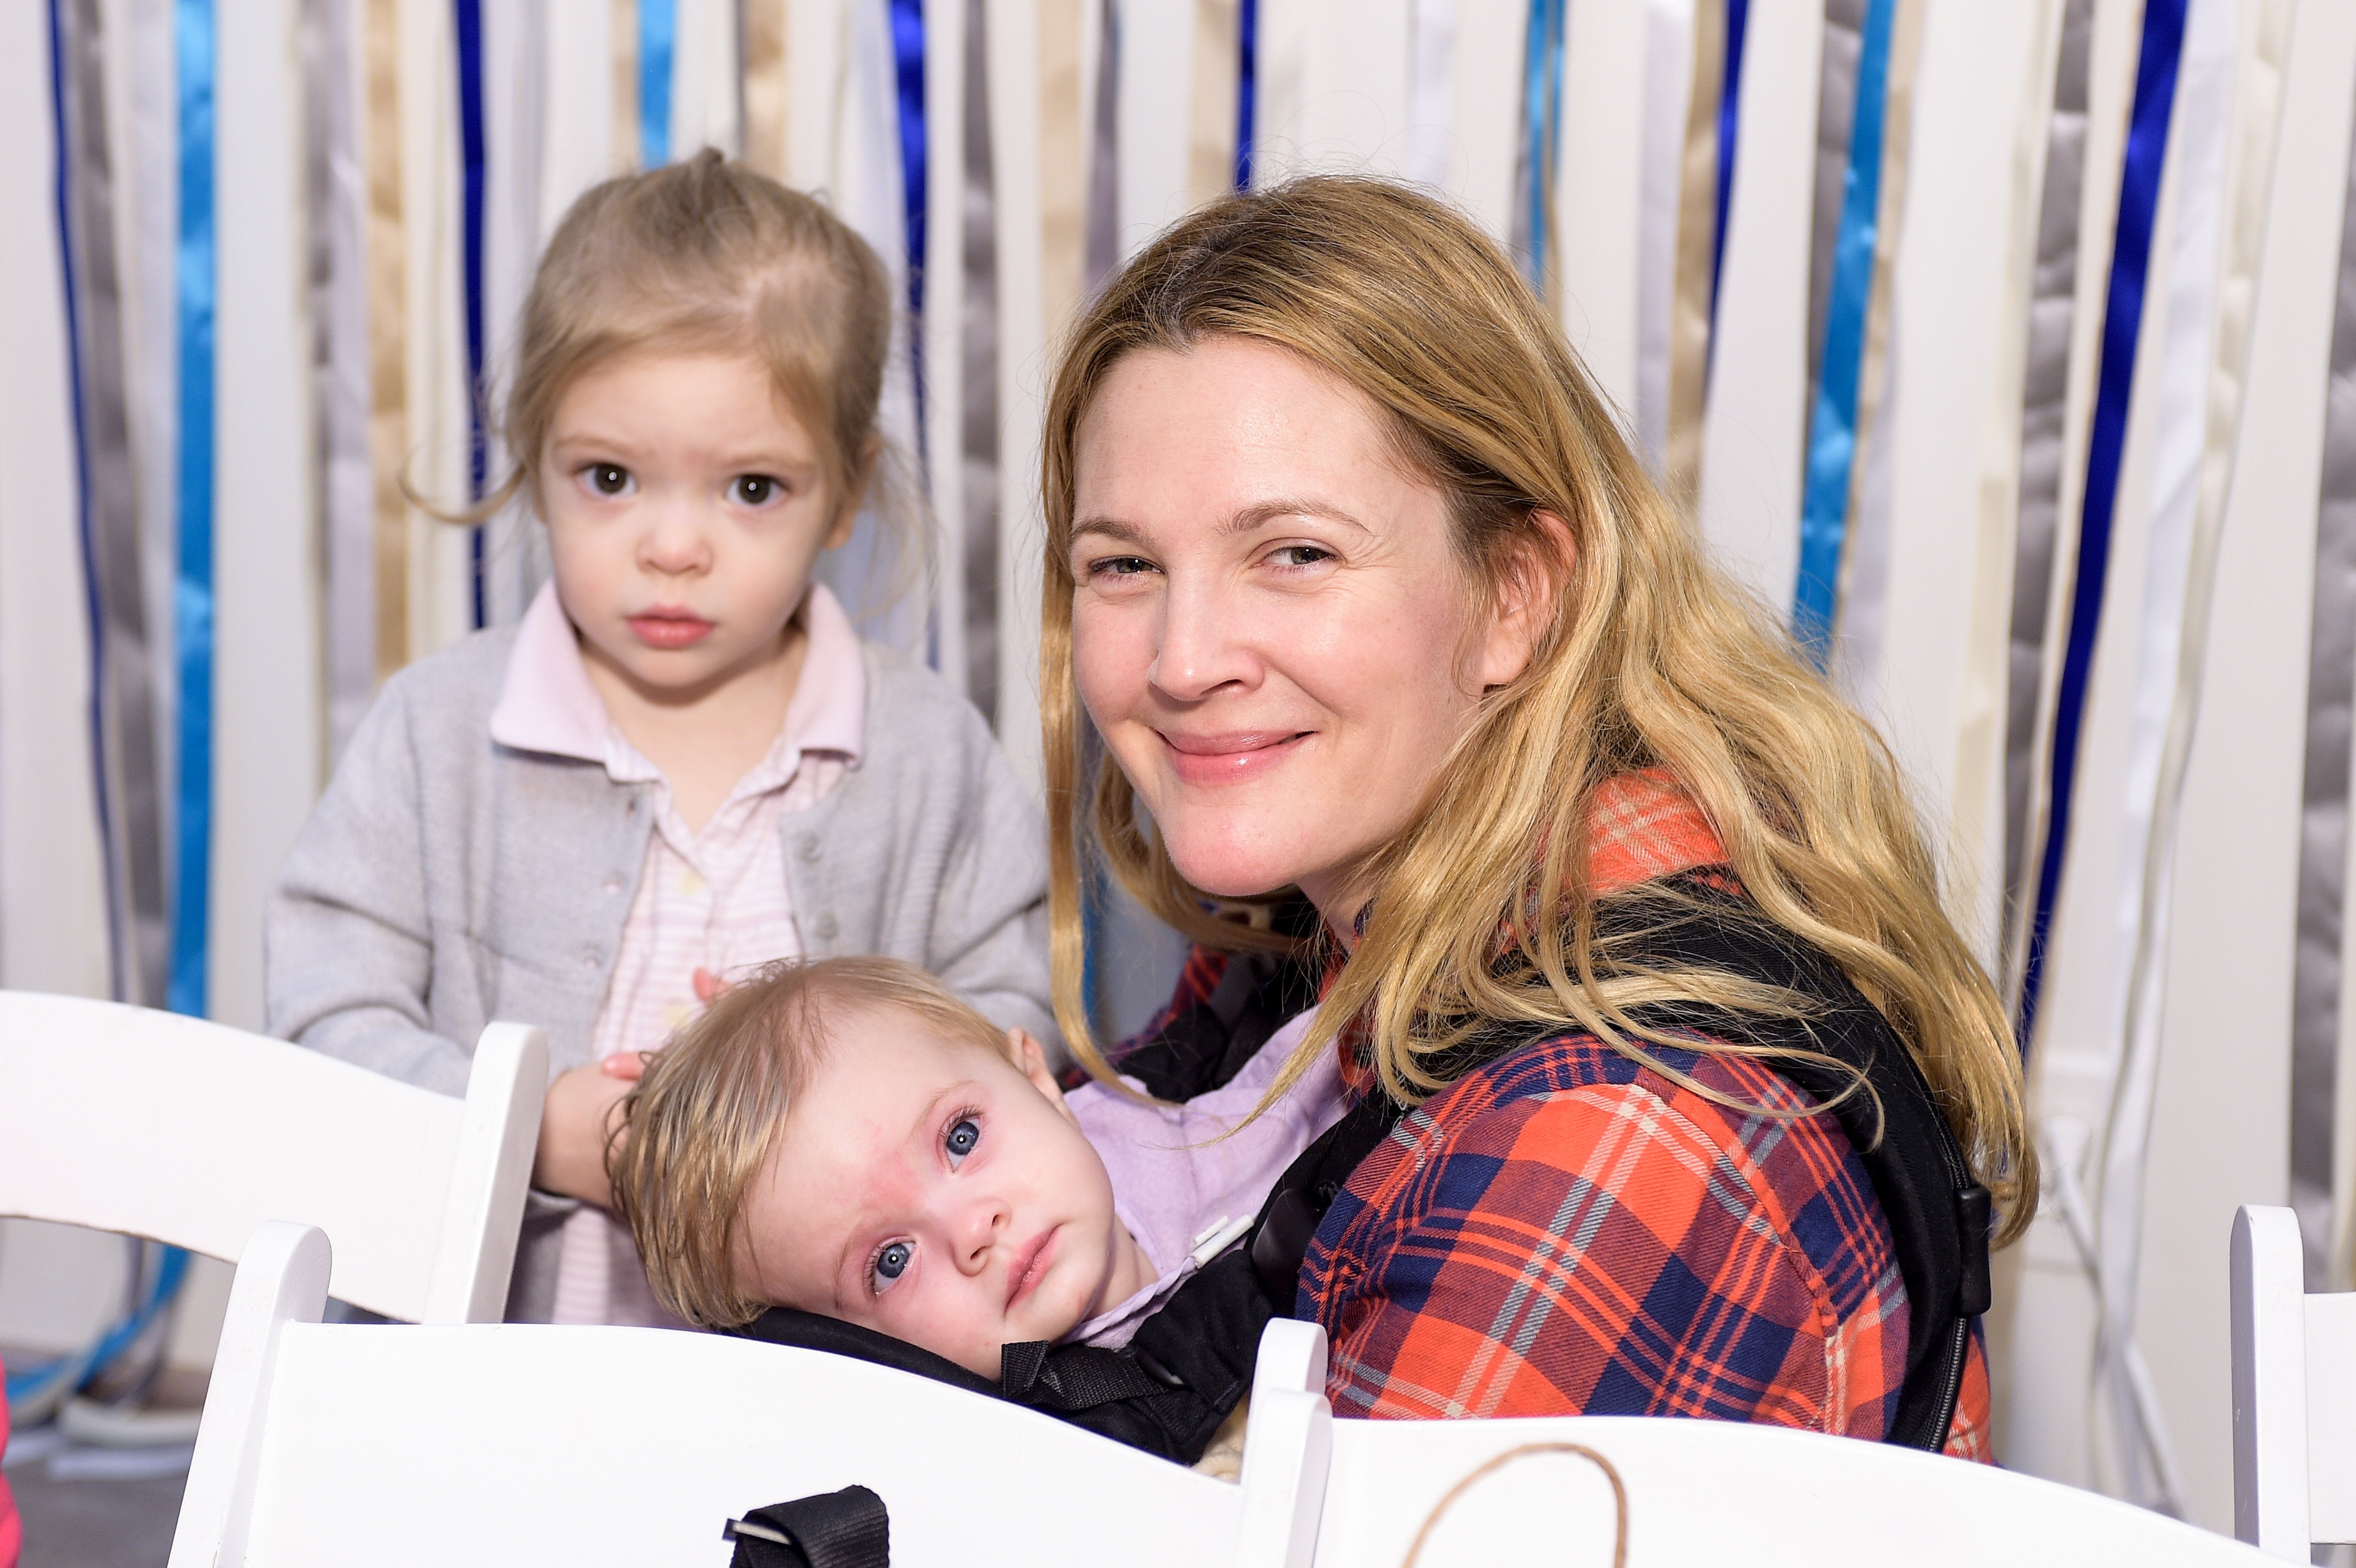 Drew Barrymore, Olive Barrymore Kopelman and Frankie Barrymore Kopelman attend the Baby2Baby Holiday Party on December 13, 2014 in Los Angeles, California | Source: Getty Images